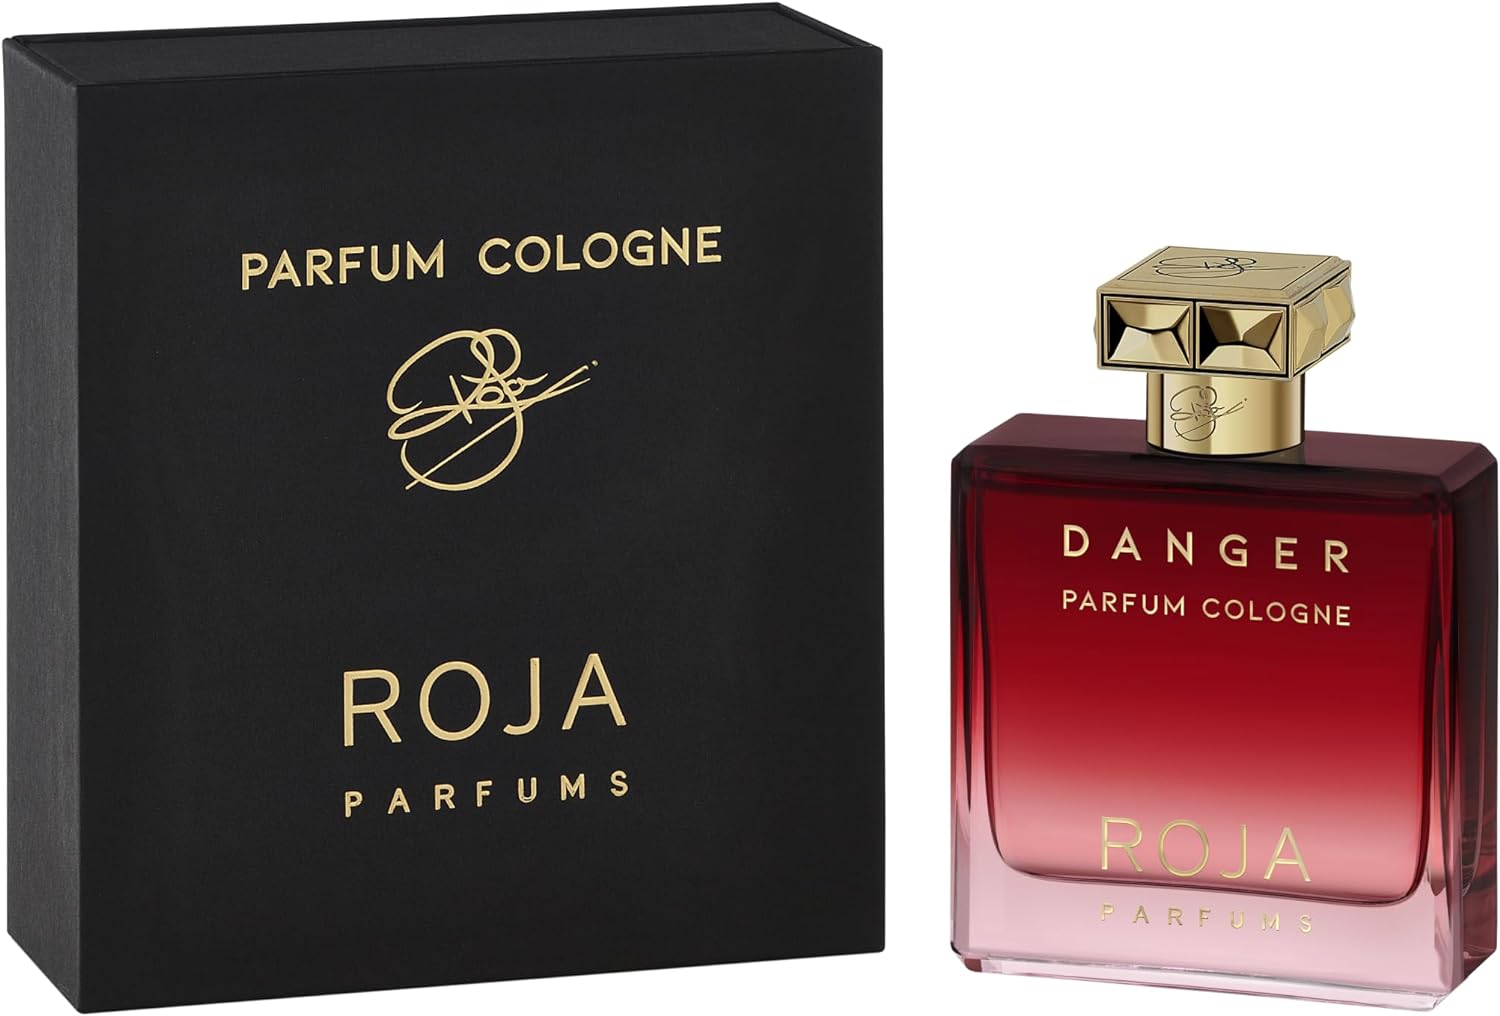 You are currently viewing Expressing Love Through Scent: Roja Dove Perfume as a Romantic Gift